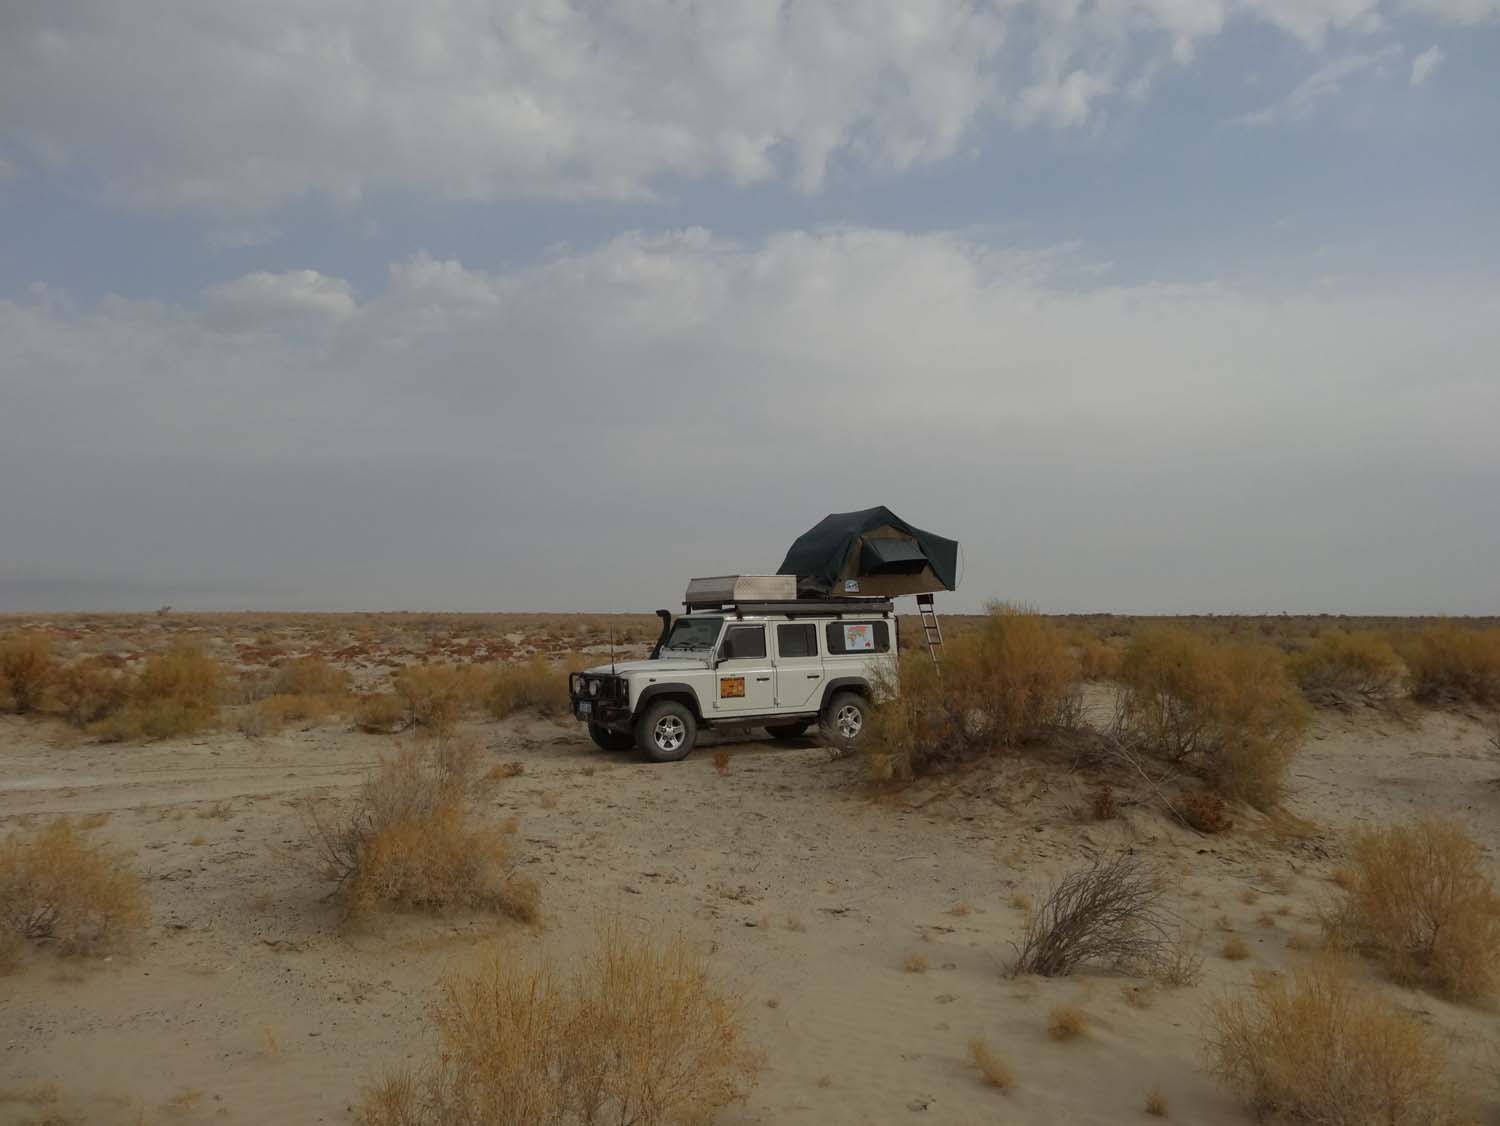 camping on the Aral Sea bed, this should not be possible